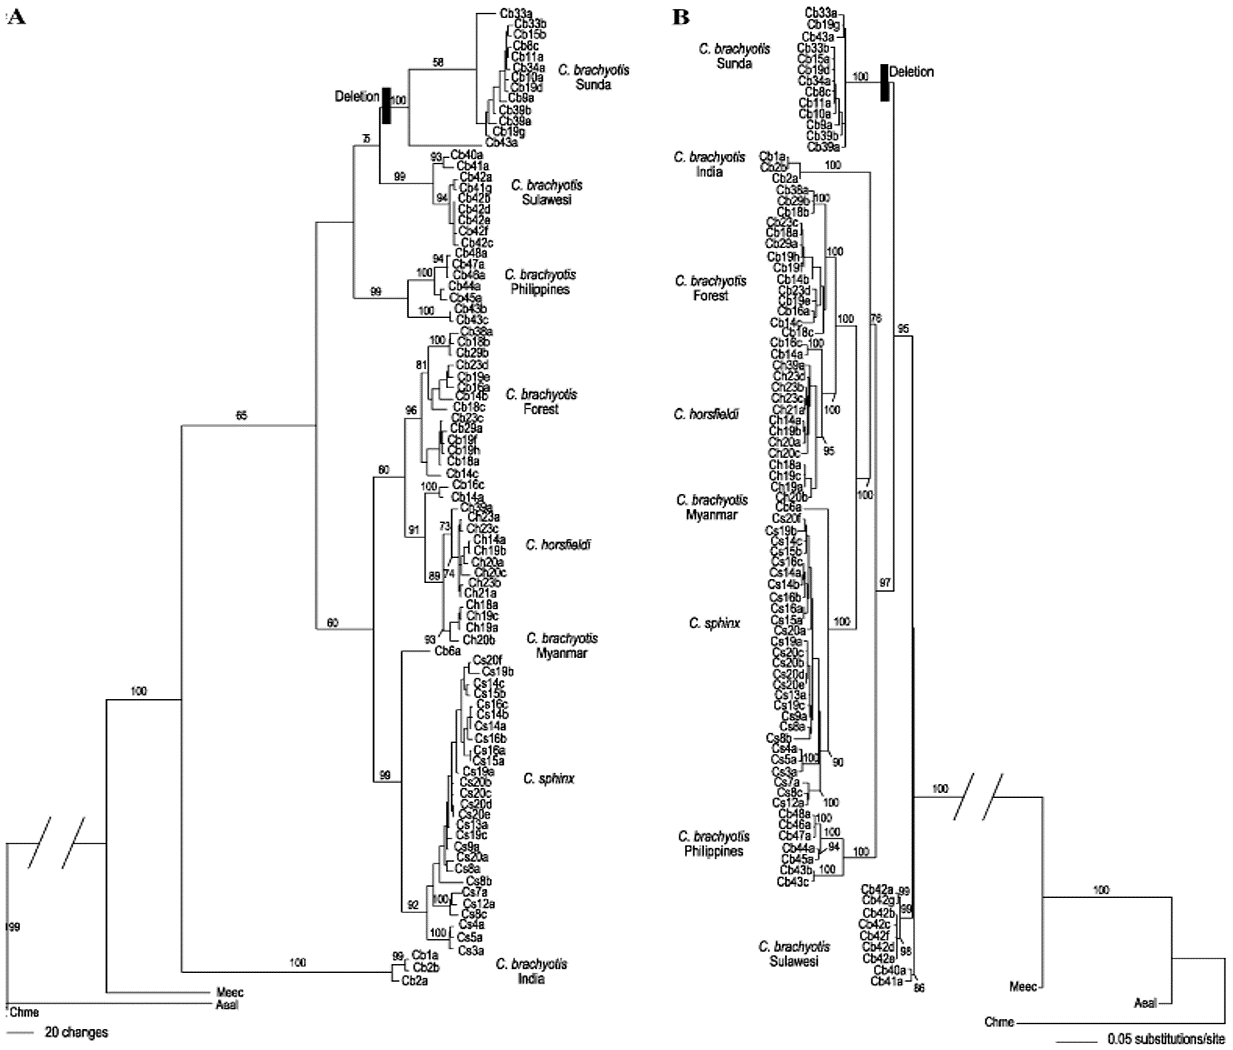 phylogenetic tree 2.png